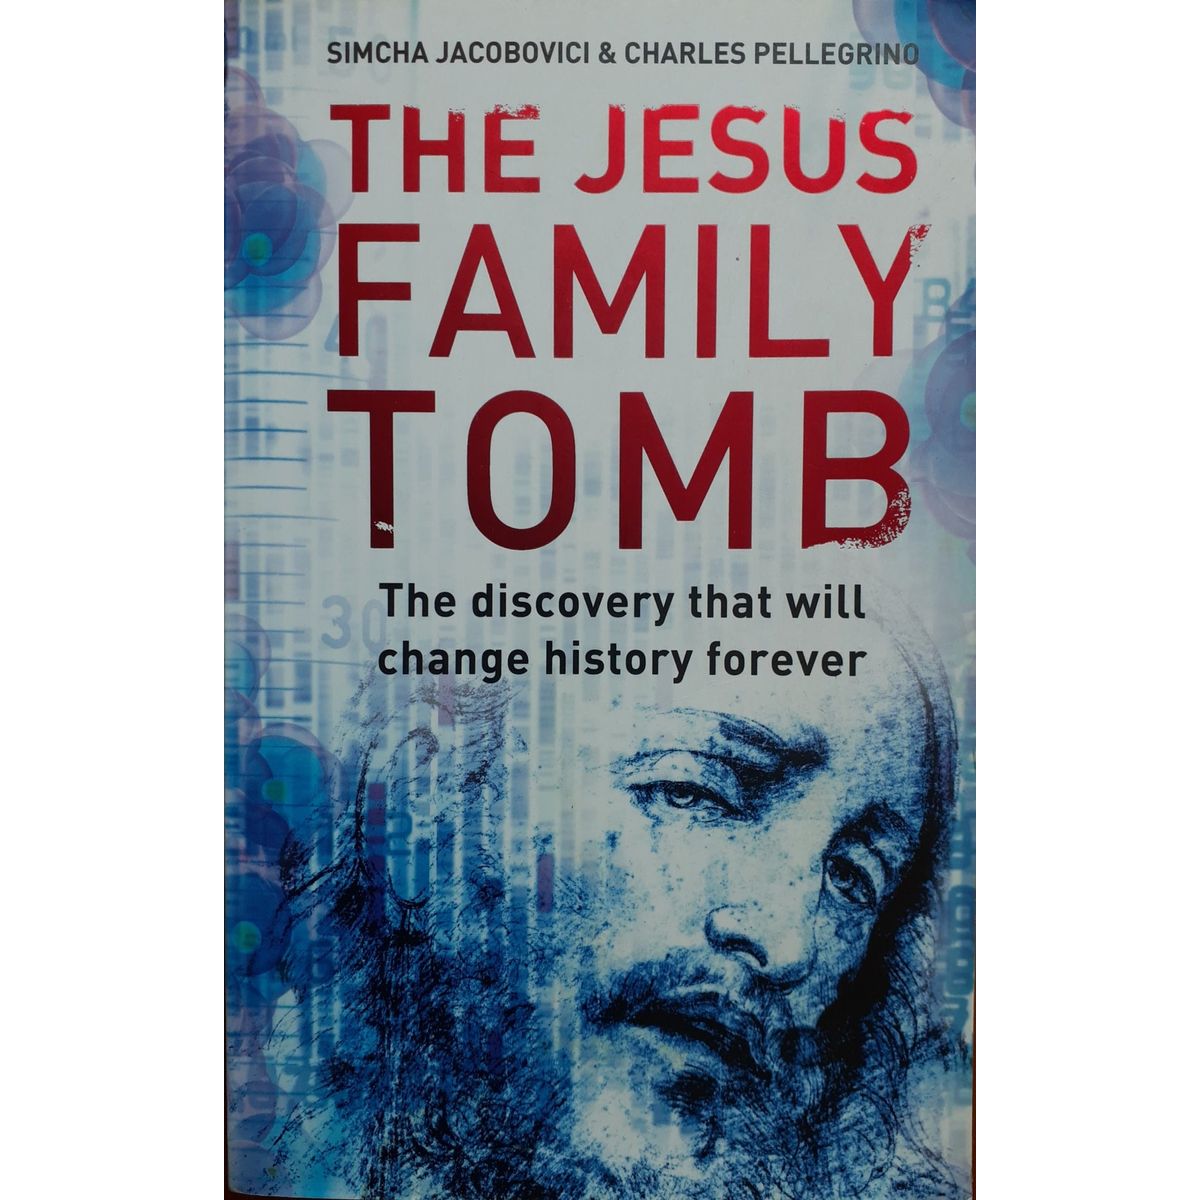 ISBN: 9780007245680 / 0007245688 - The Jesus Family Tomb: The Discovery That Will Change History Forever by Simcha Jacobovici & Charles Pellegrino [2007]